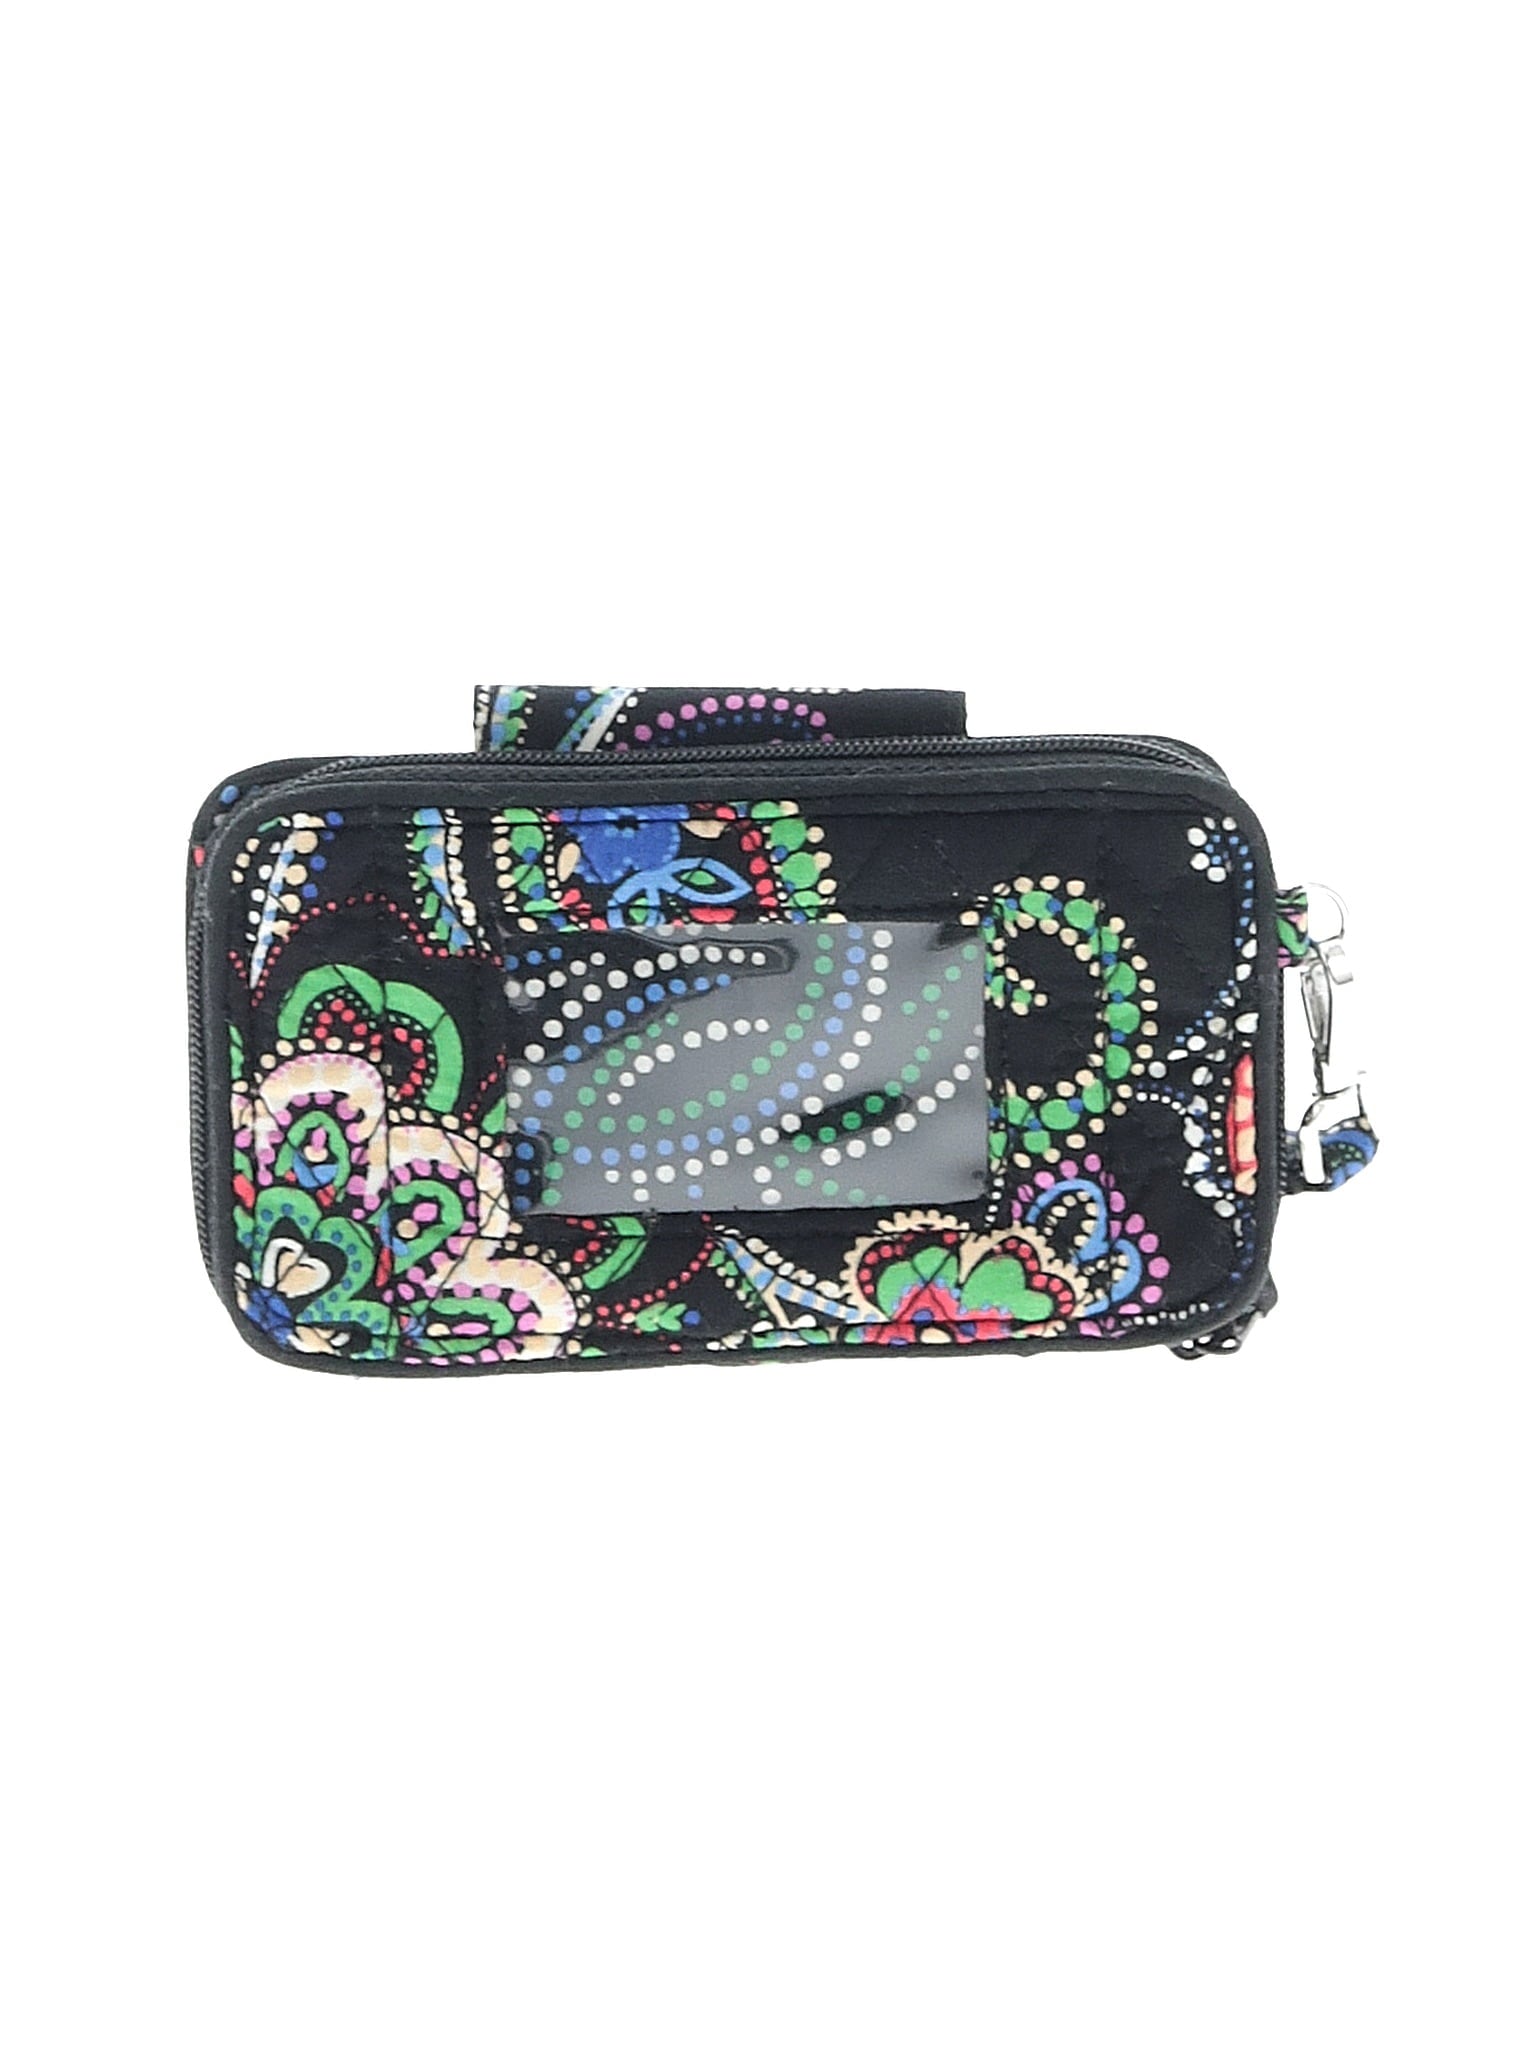 Kiev Paisley Smartphone Wristlet for iPhone 6 size - One Size